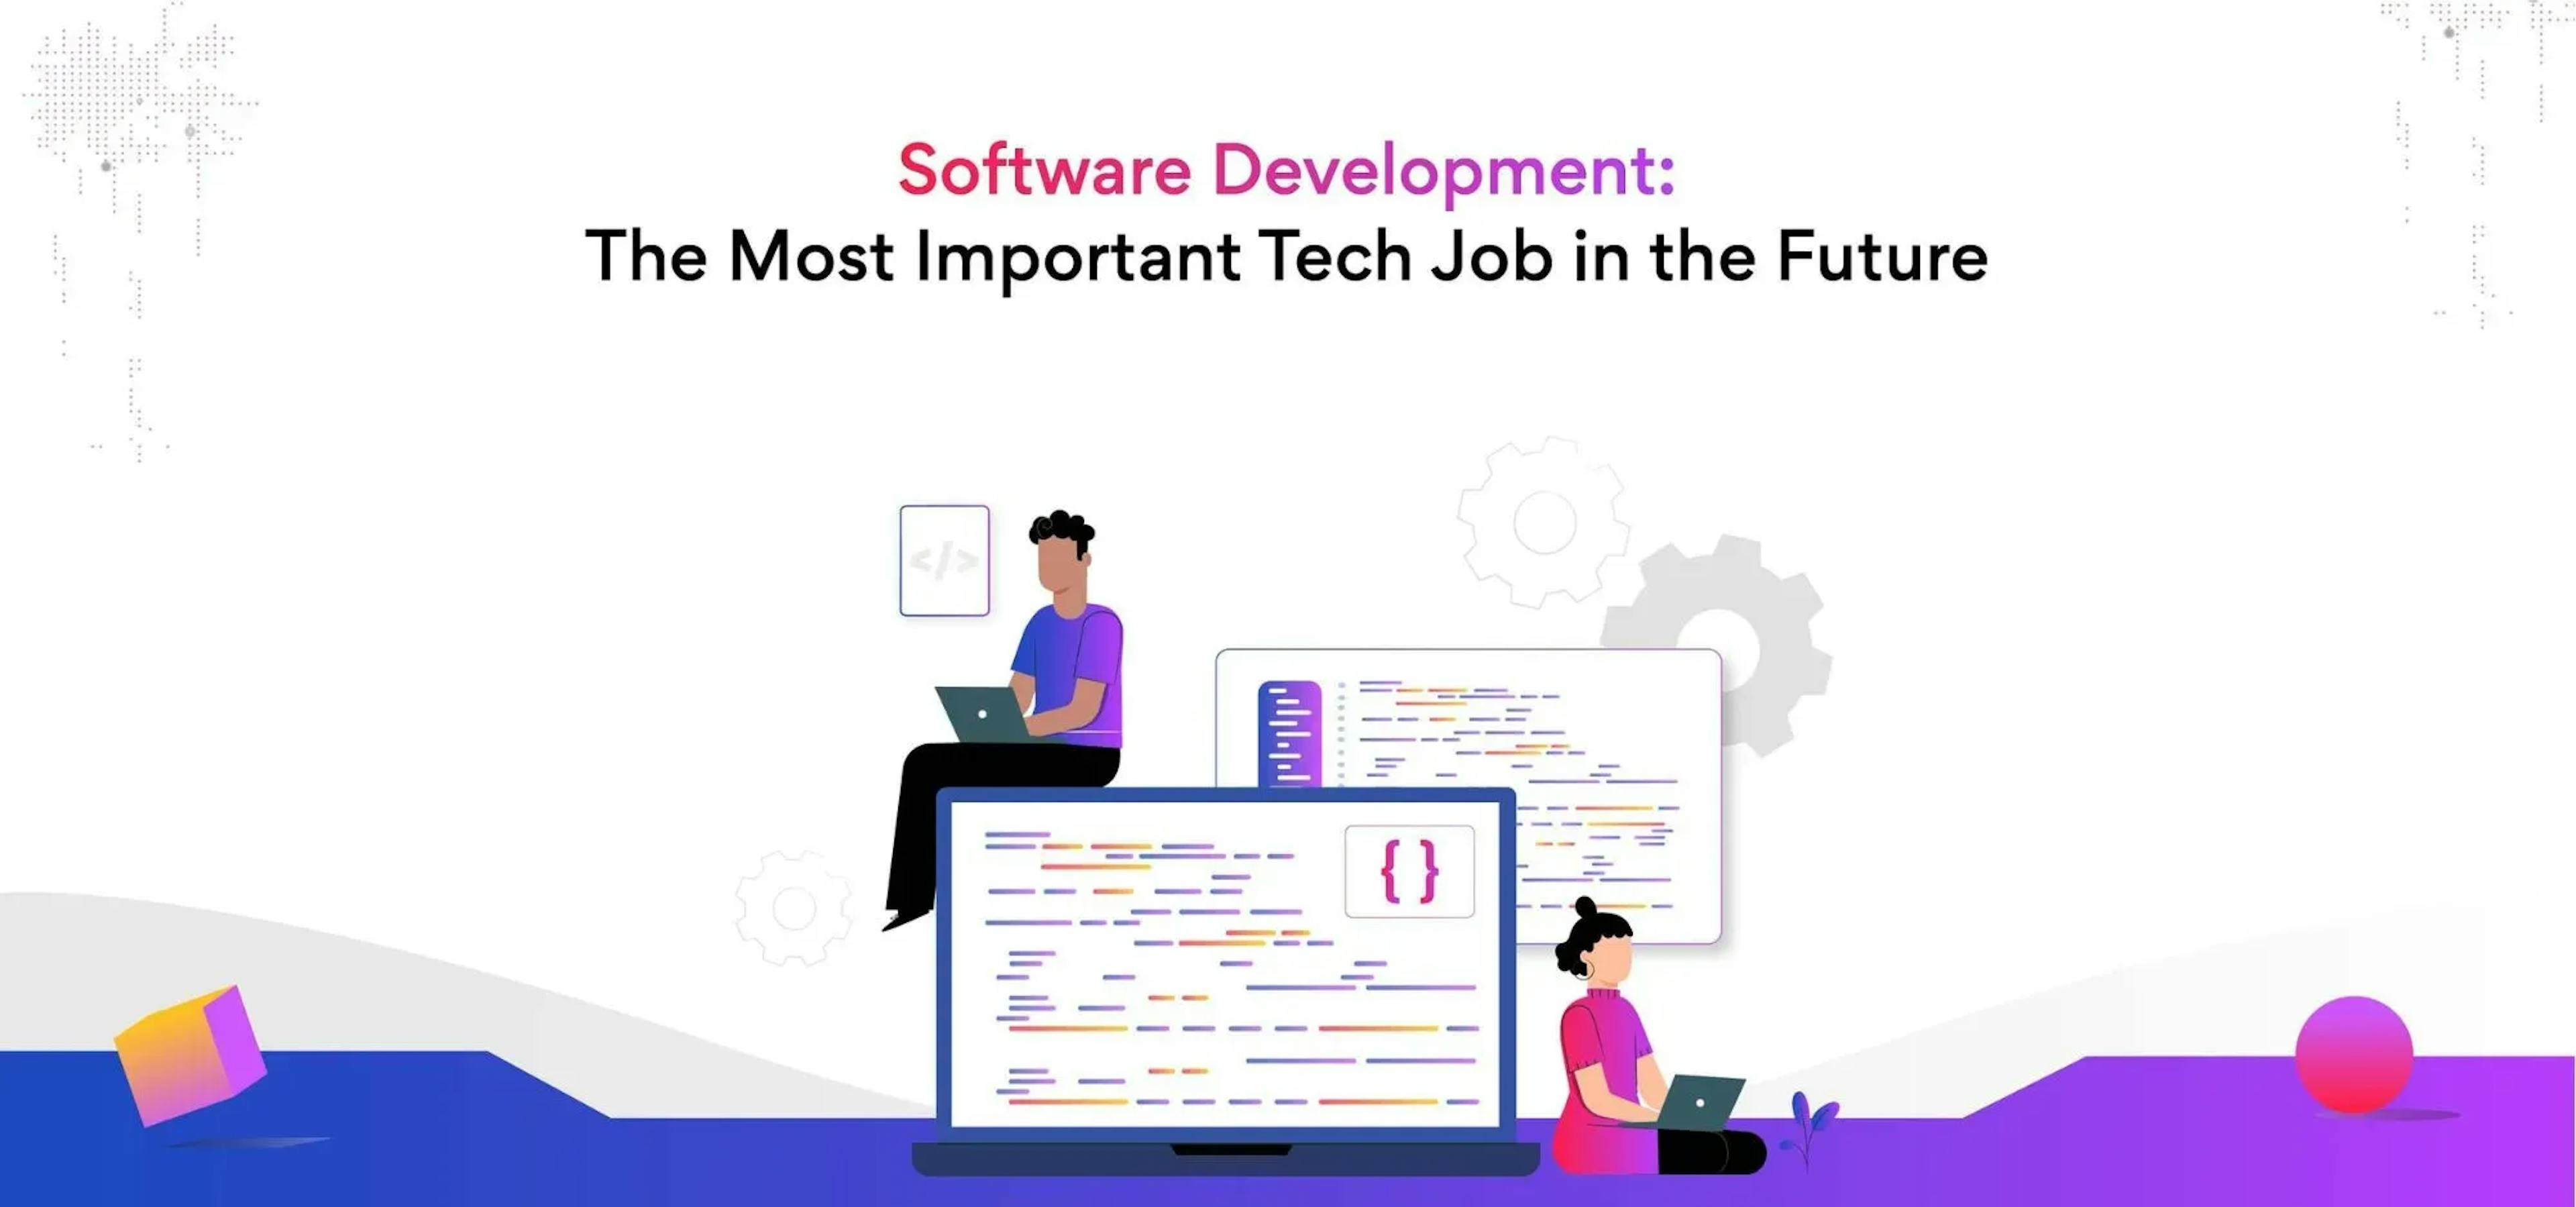 Software Development: The Most Important Tech Job in the Future